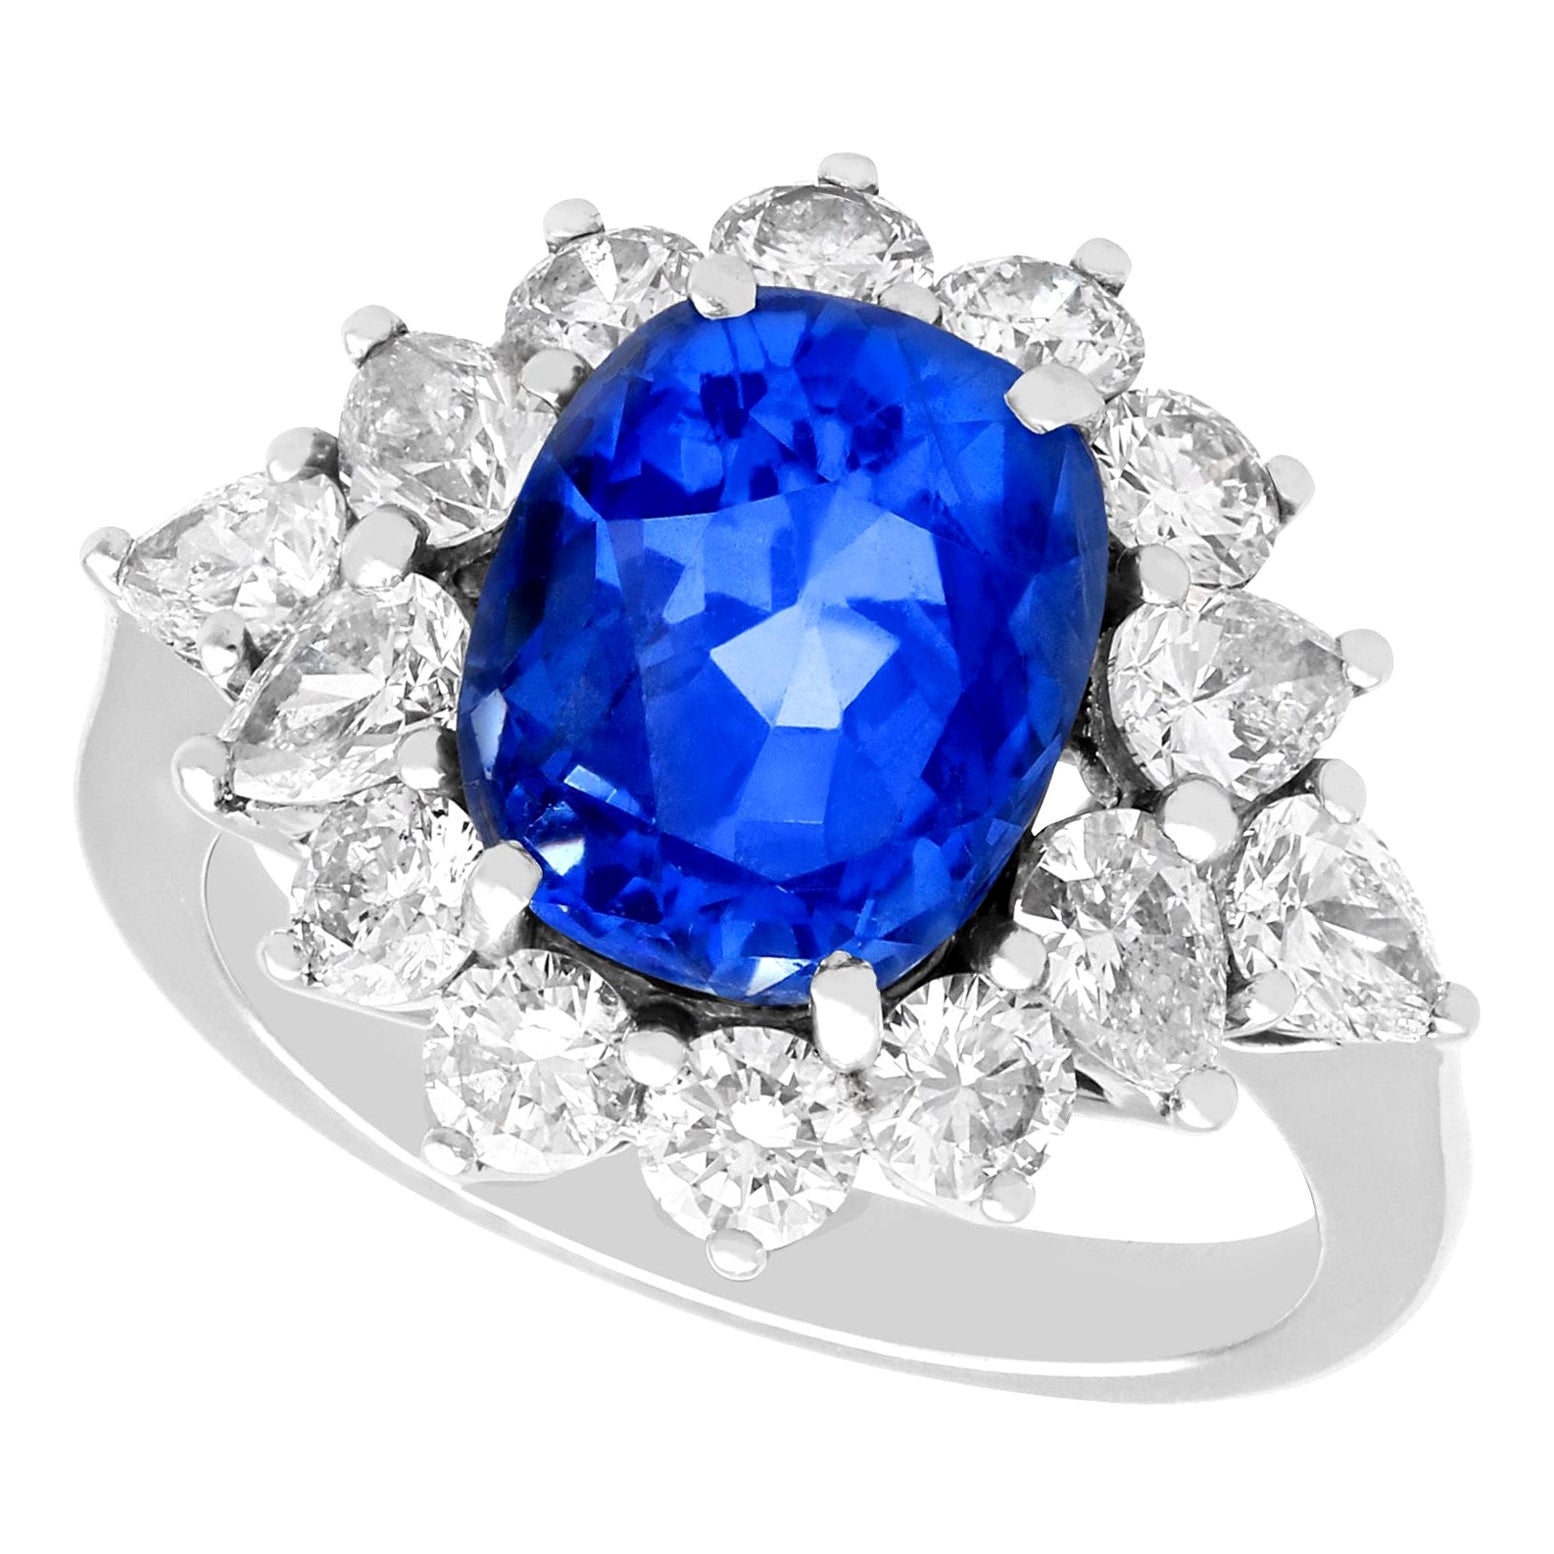 Vintage 6.83ct Sapphire and 2.84ct Diamond Platinum Cocktail Ring, circa 1970 For Sale